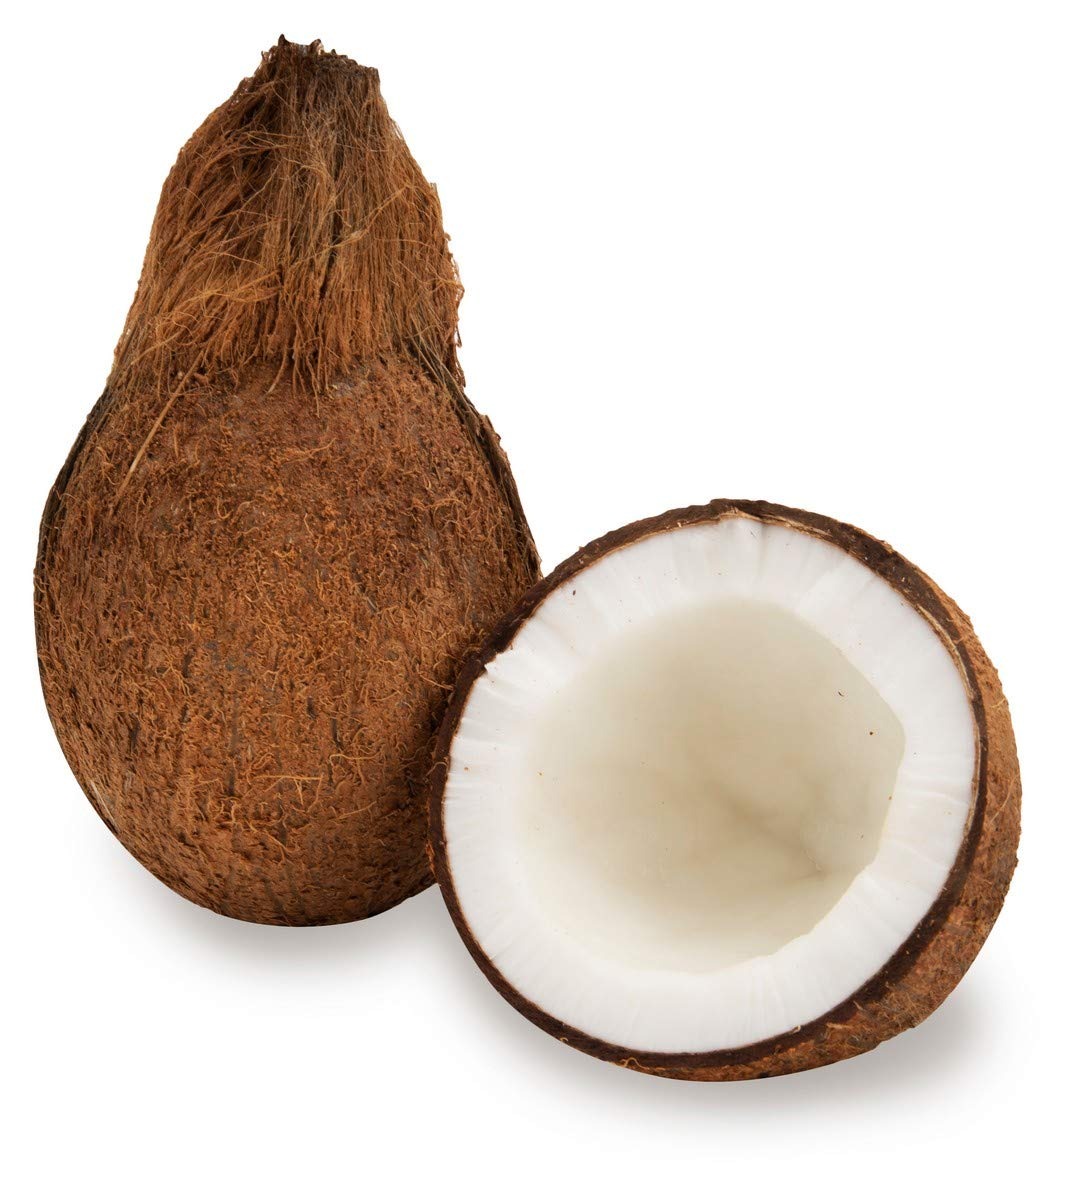 Big size More Water Husk Coconut for Summer from Millennium Grains Imports & Exports